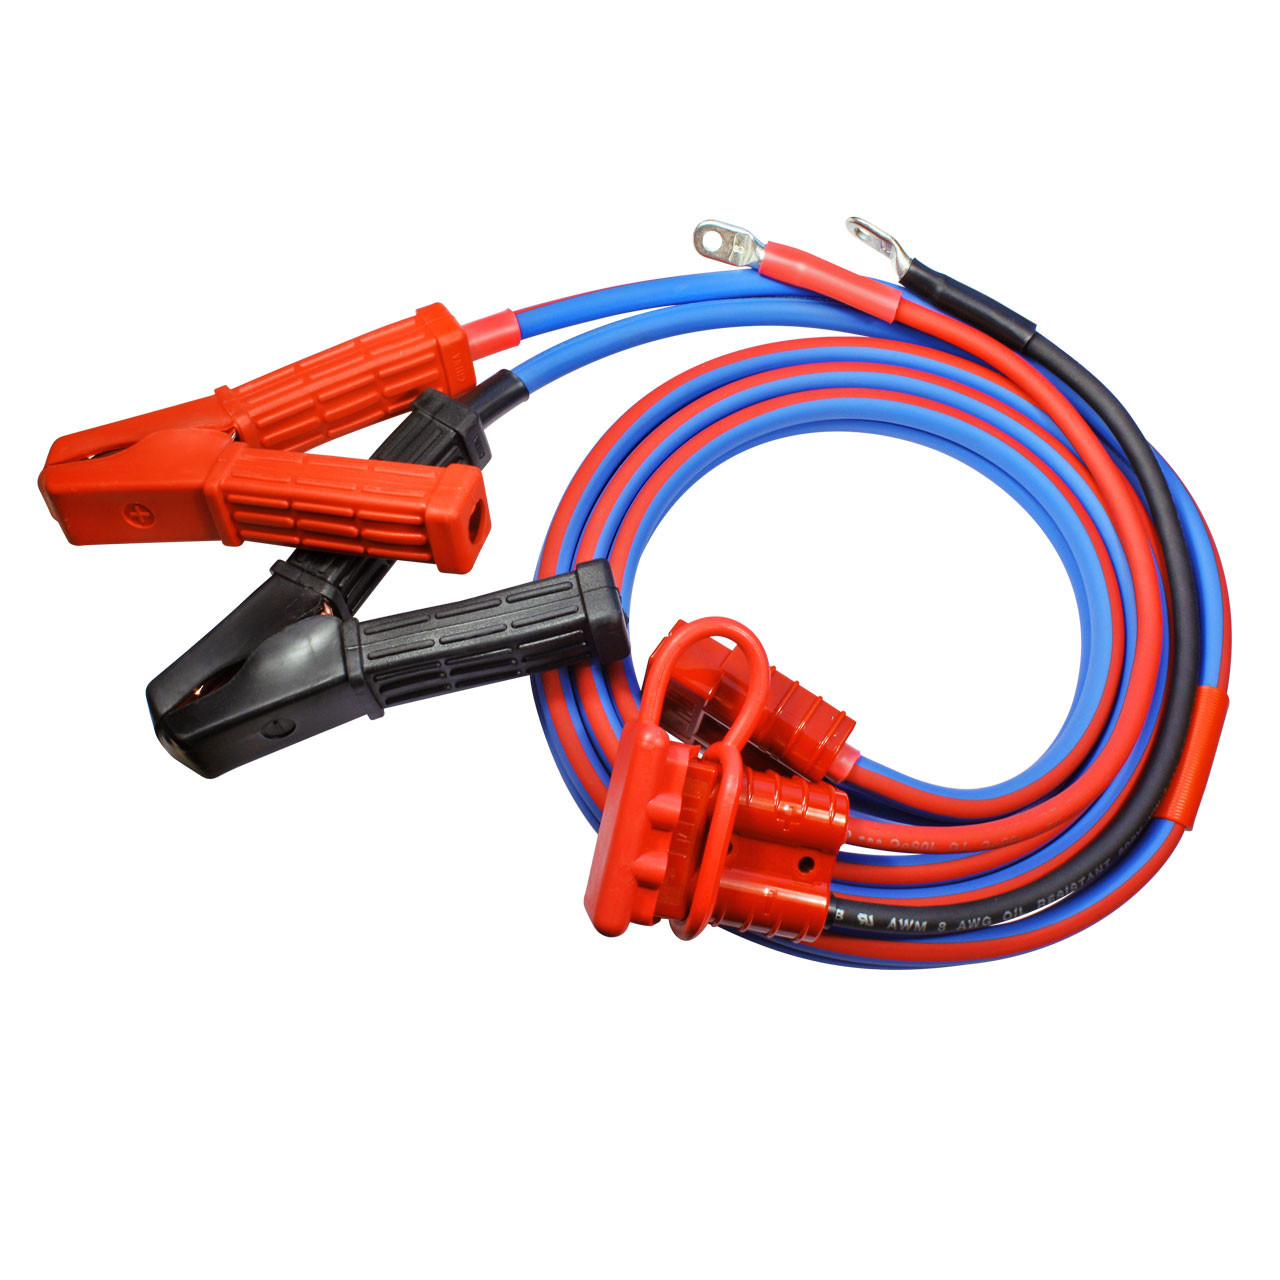 8 Gauge Premium Harness Style Jumper Cables - 6 foot cable with 1 foot harness. Sized for ATVs, UTVs, Motorcycles, Golf Carts, Mowers, Scooters, and similar